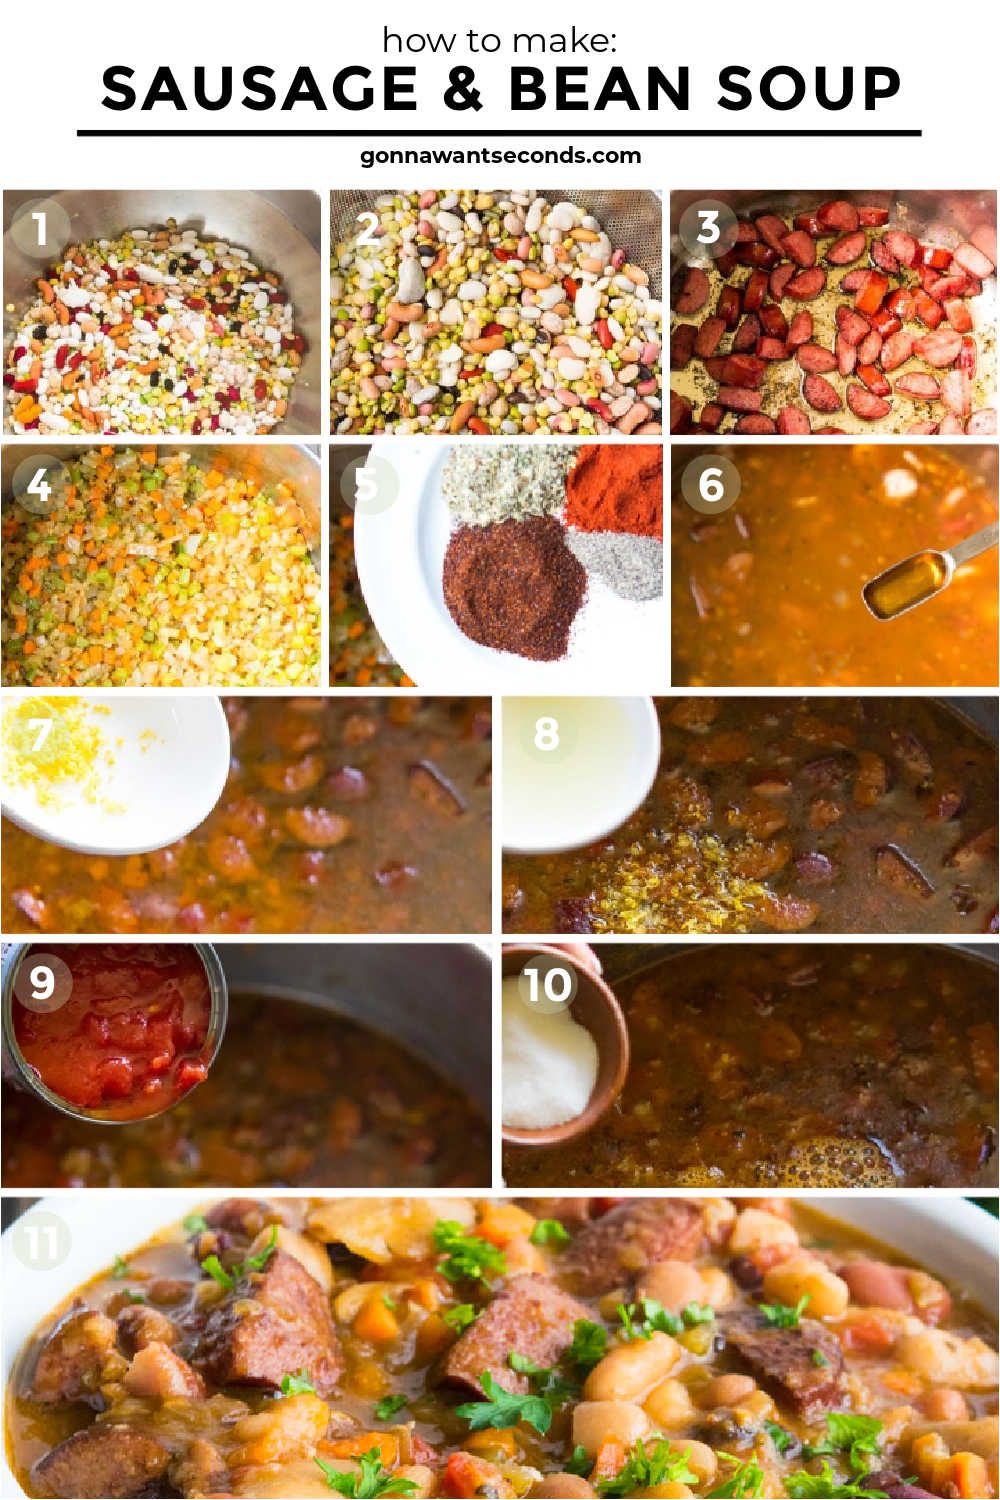 step by step how to make sausage and bean soup